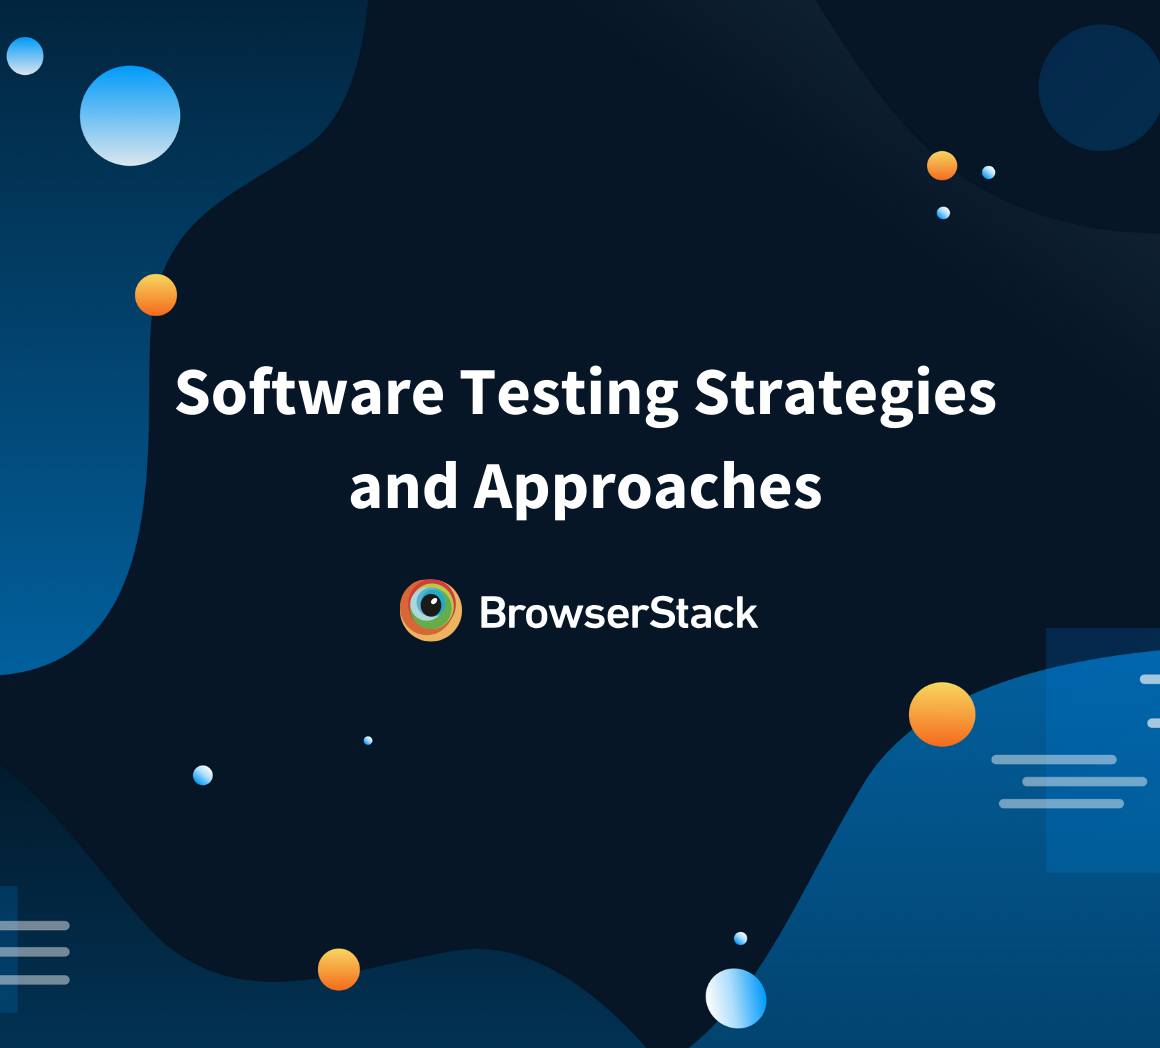 Software Testing Strategies and Approaches